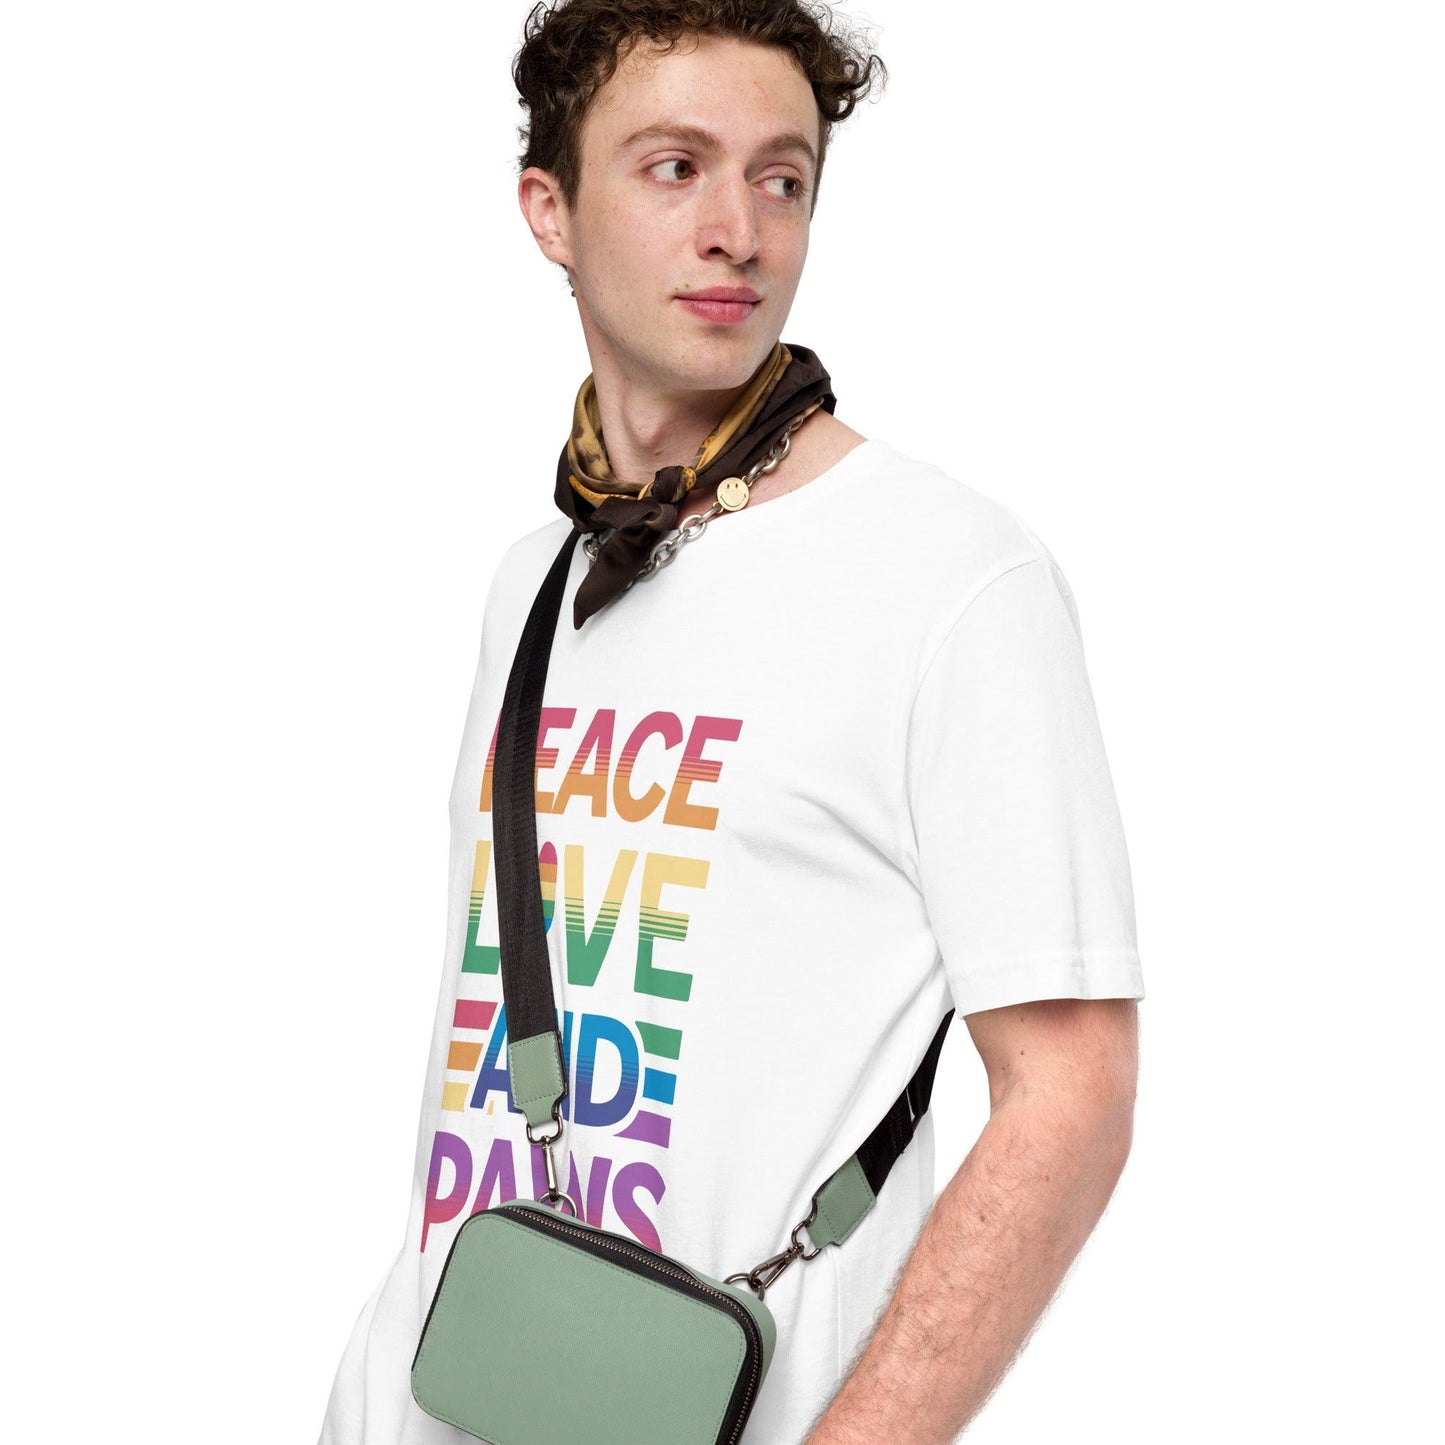 Peace, Love, and Paws Crew Neck Tee - Pet Pride Tees